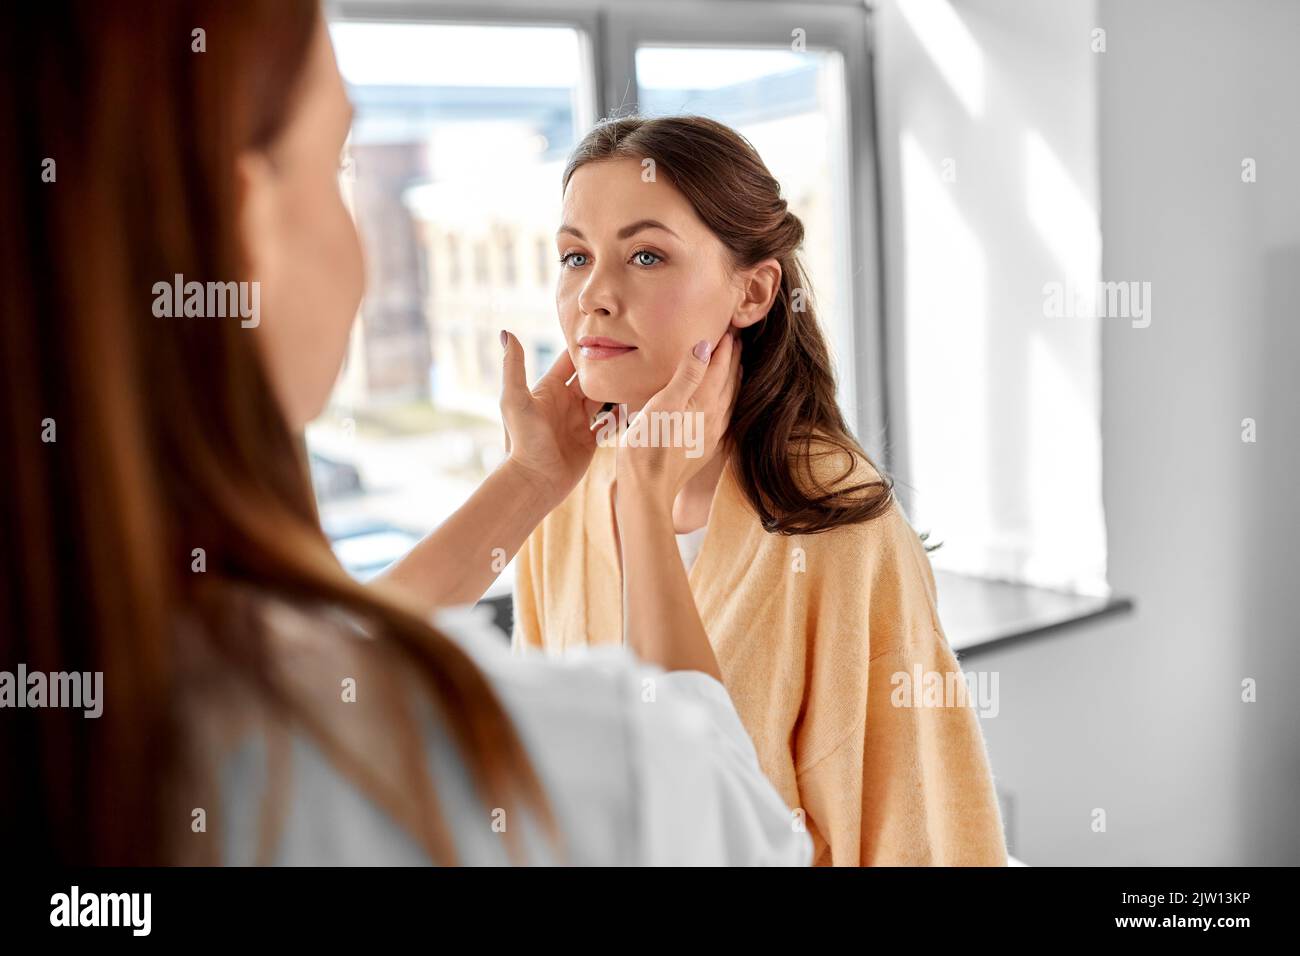 doctor checking lymph nodes of woman at hospital Stock Photo